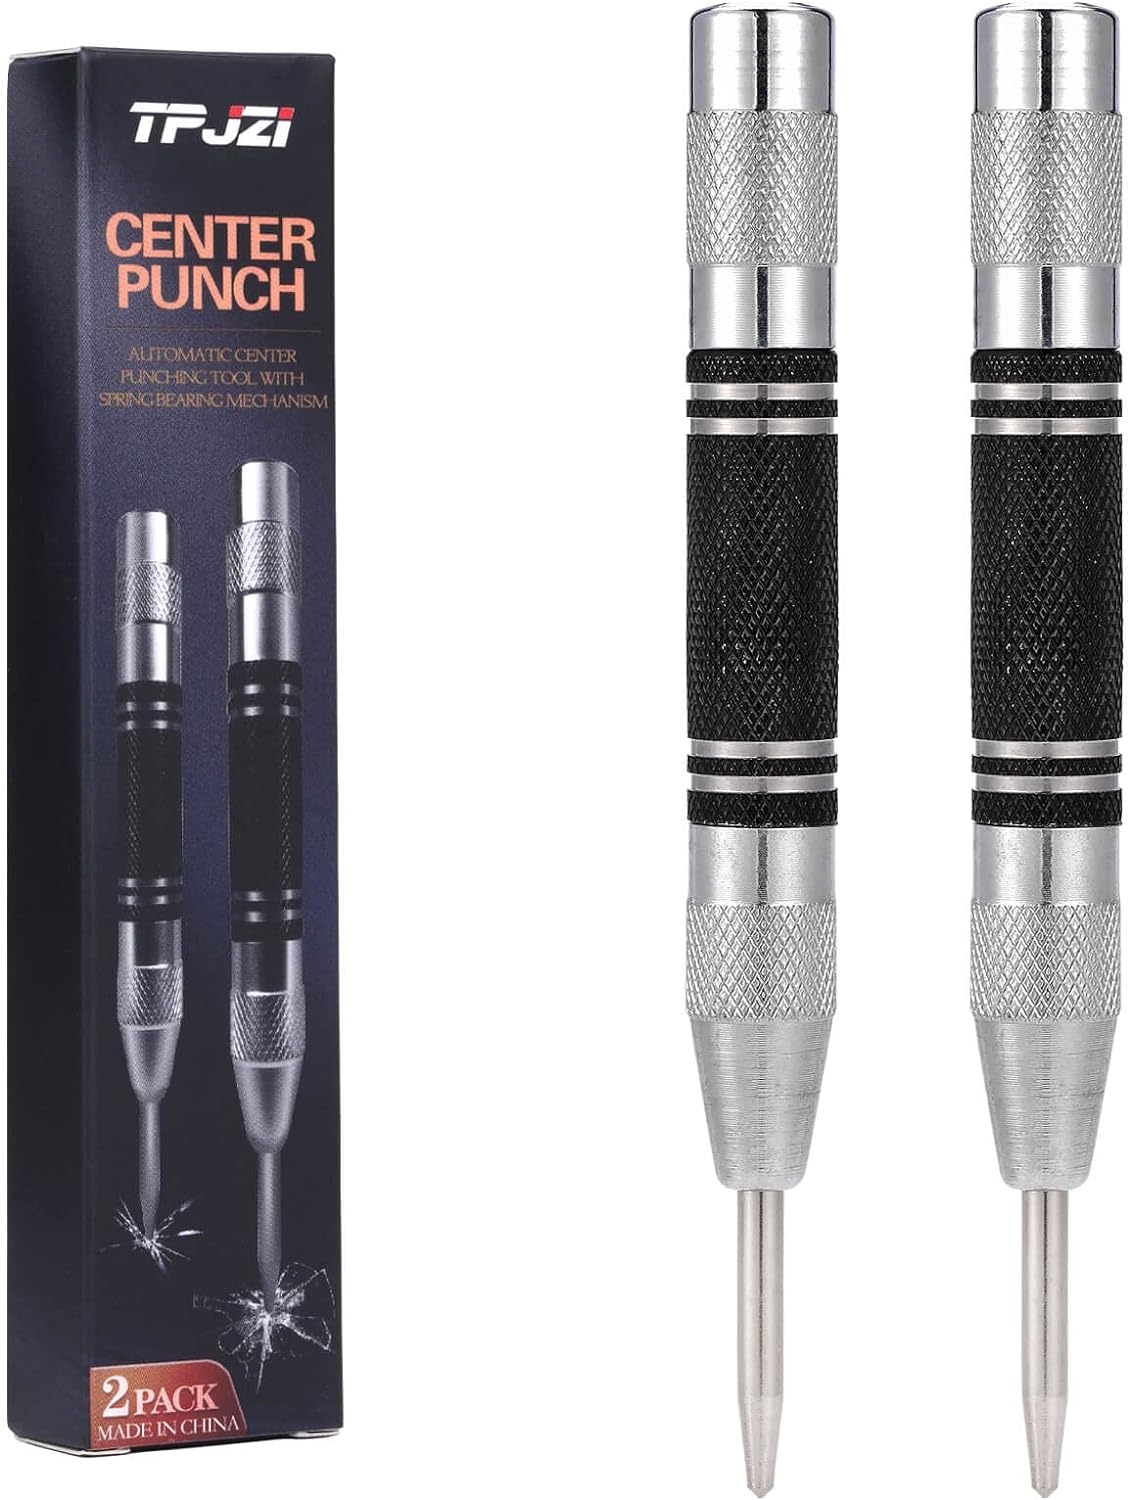 TPJZI Automatic Center Punch for Metal, 5 Inch Spring Loaded Center  Punch.(2 Pack) Center Hole Punch as Metal Punch Tool and Spring P